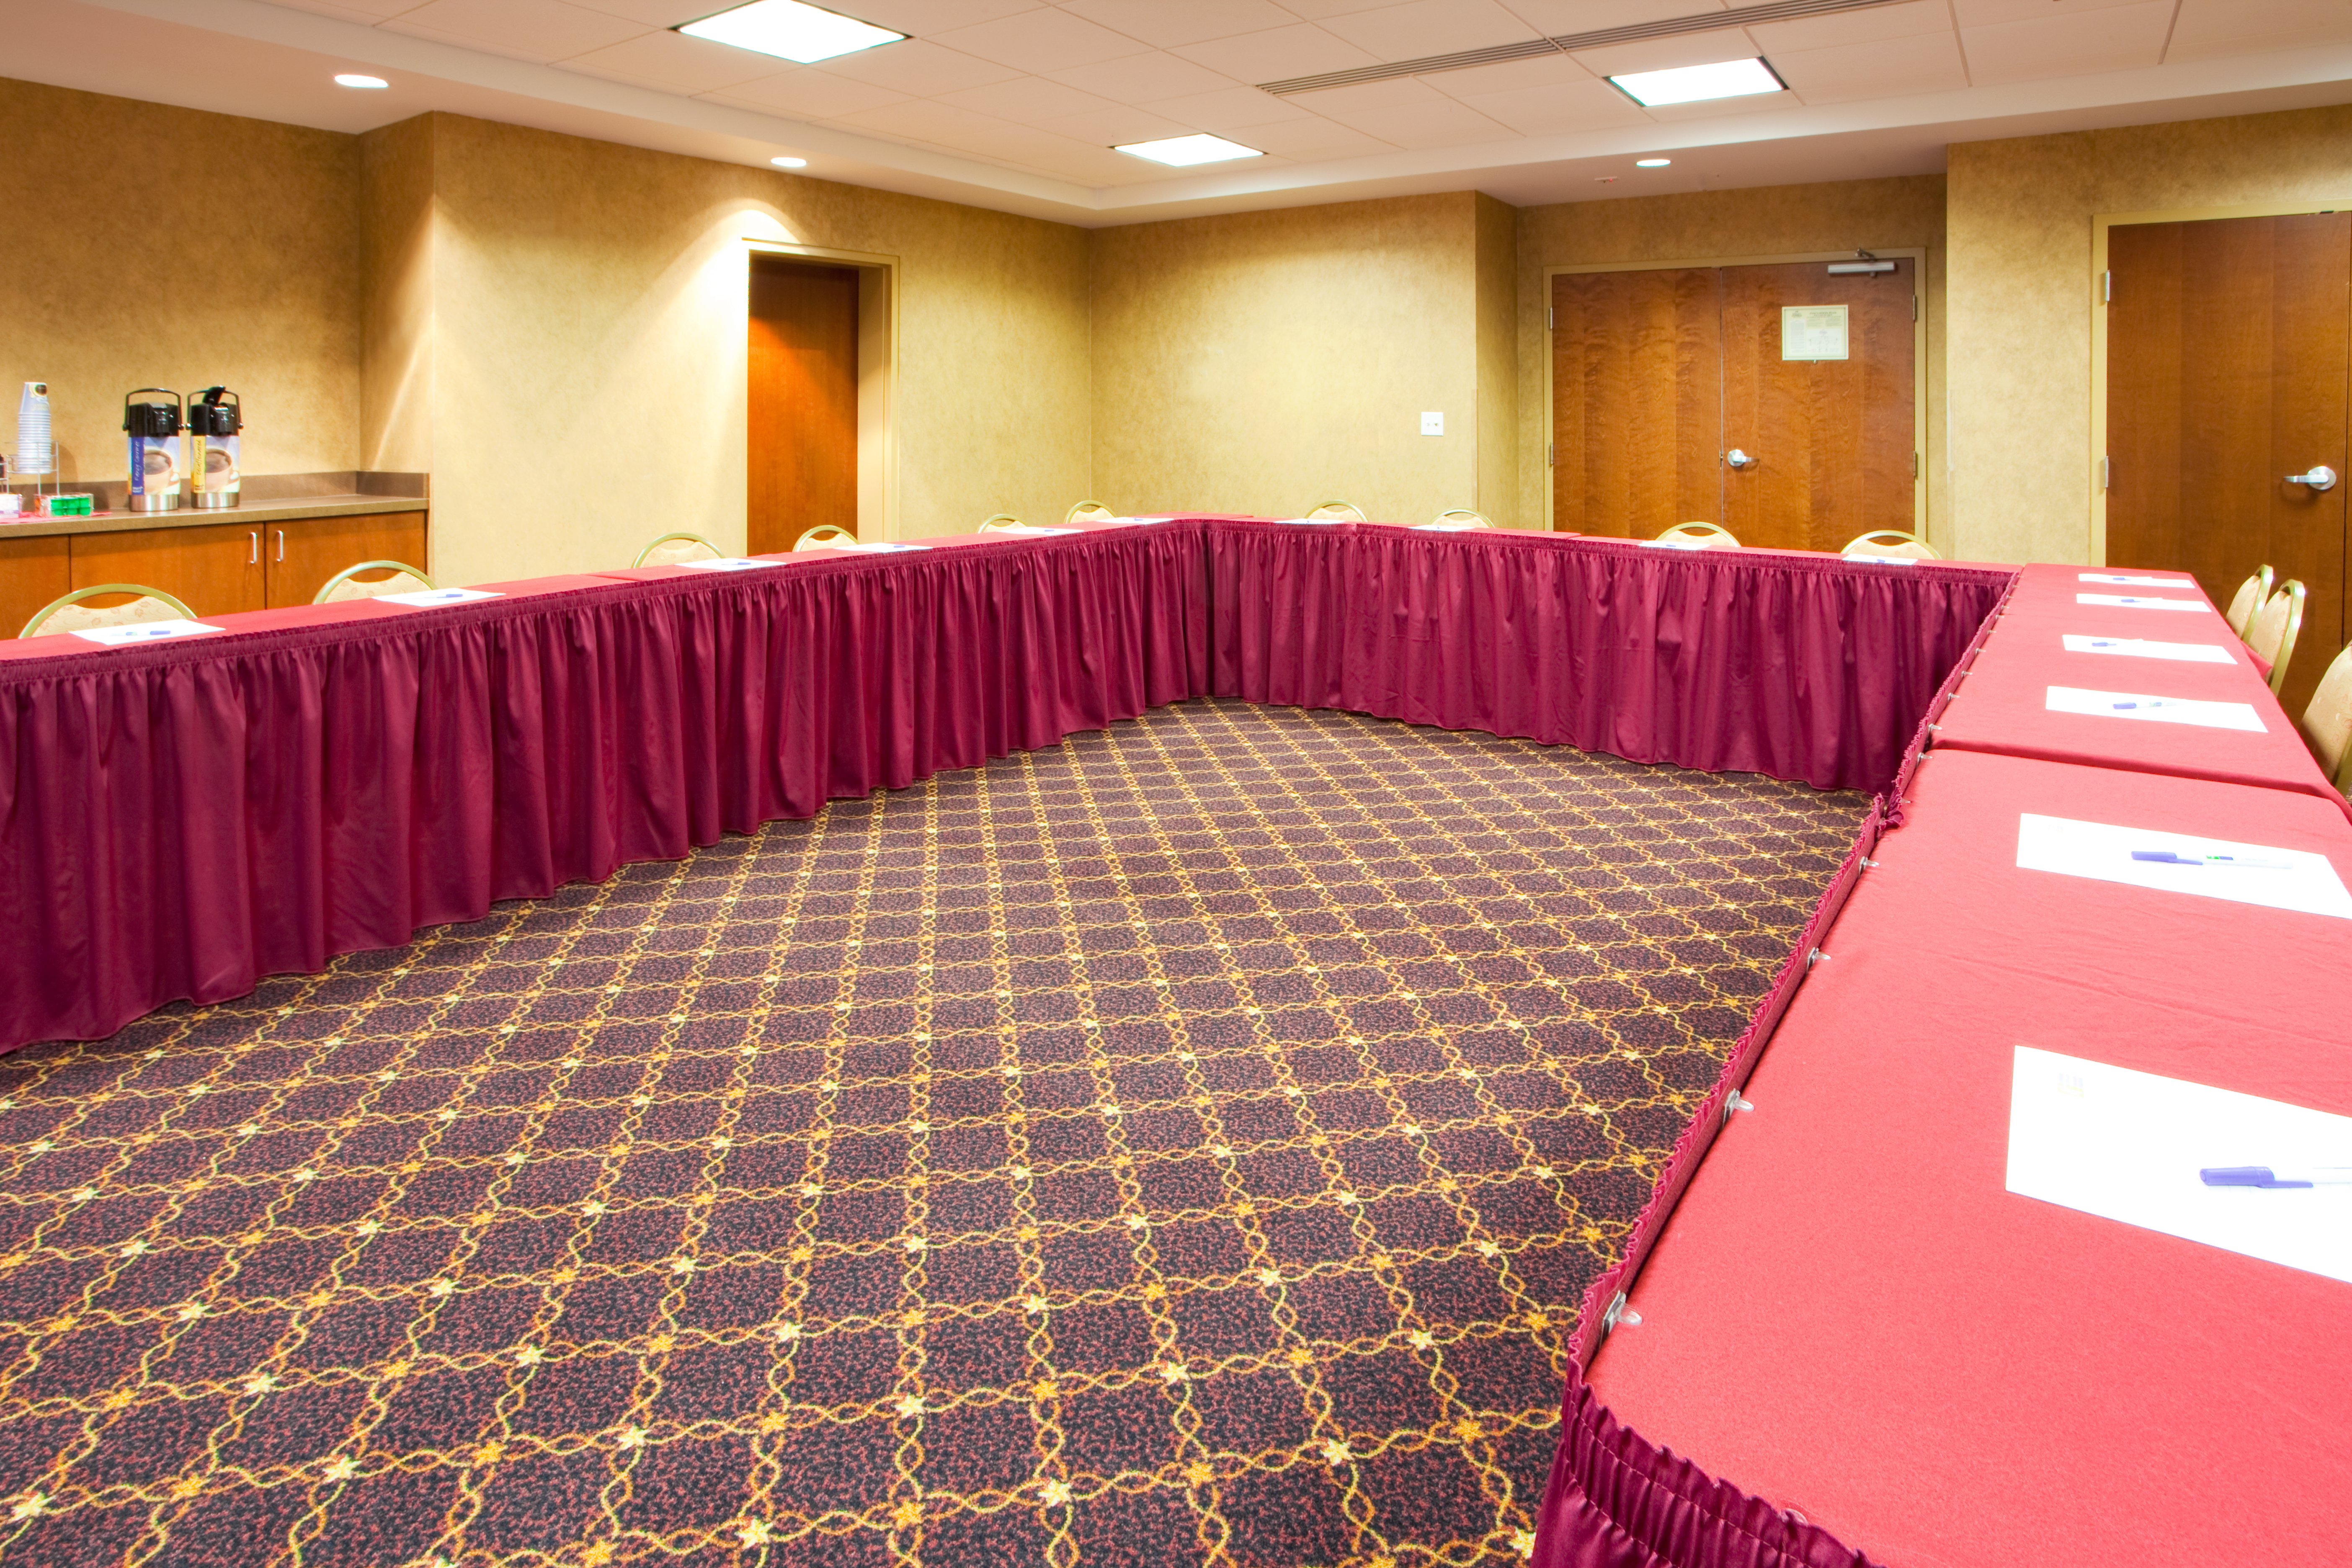 Meeting Room can accommodate 40 attendees in Hagerstown MD